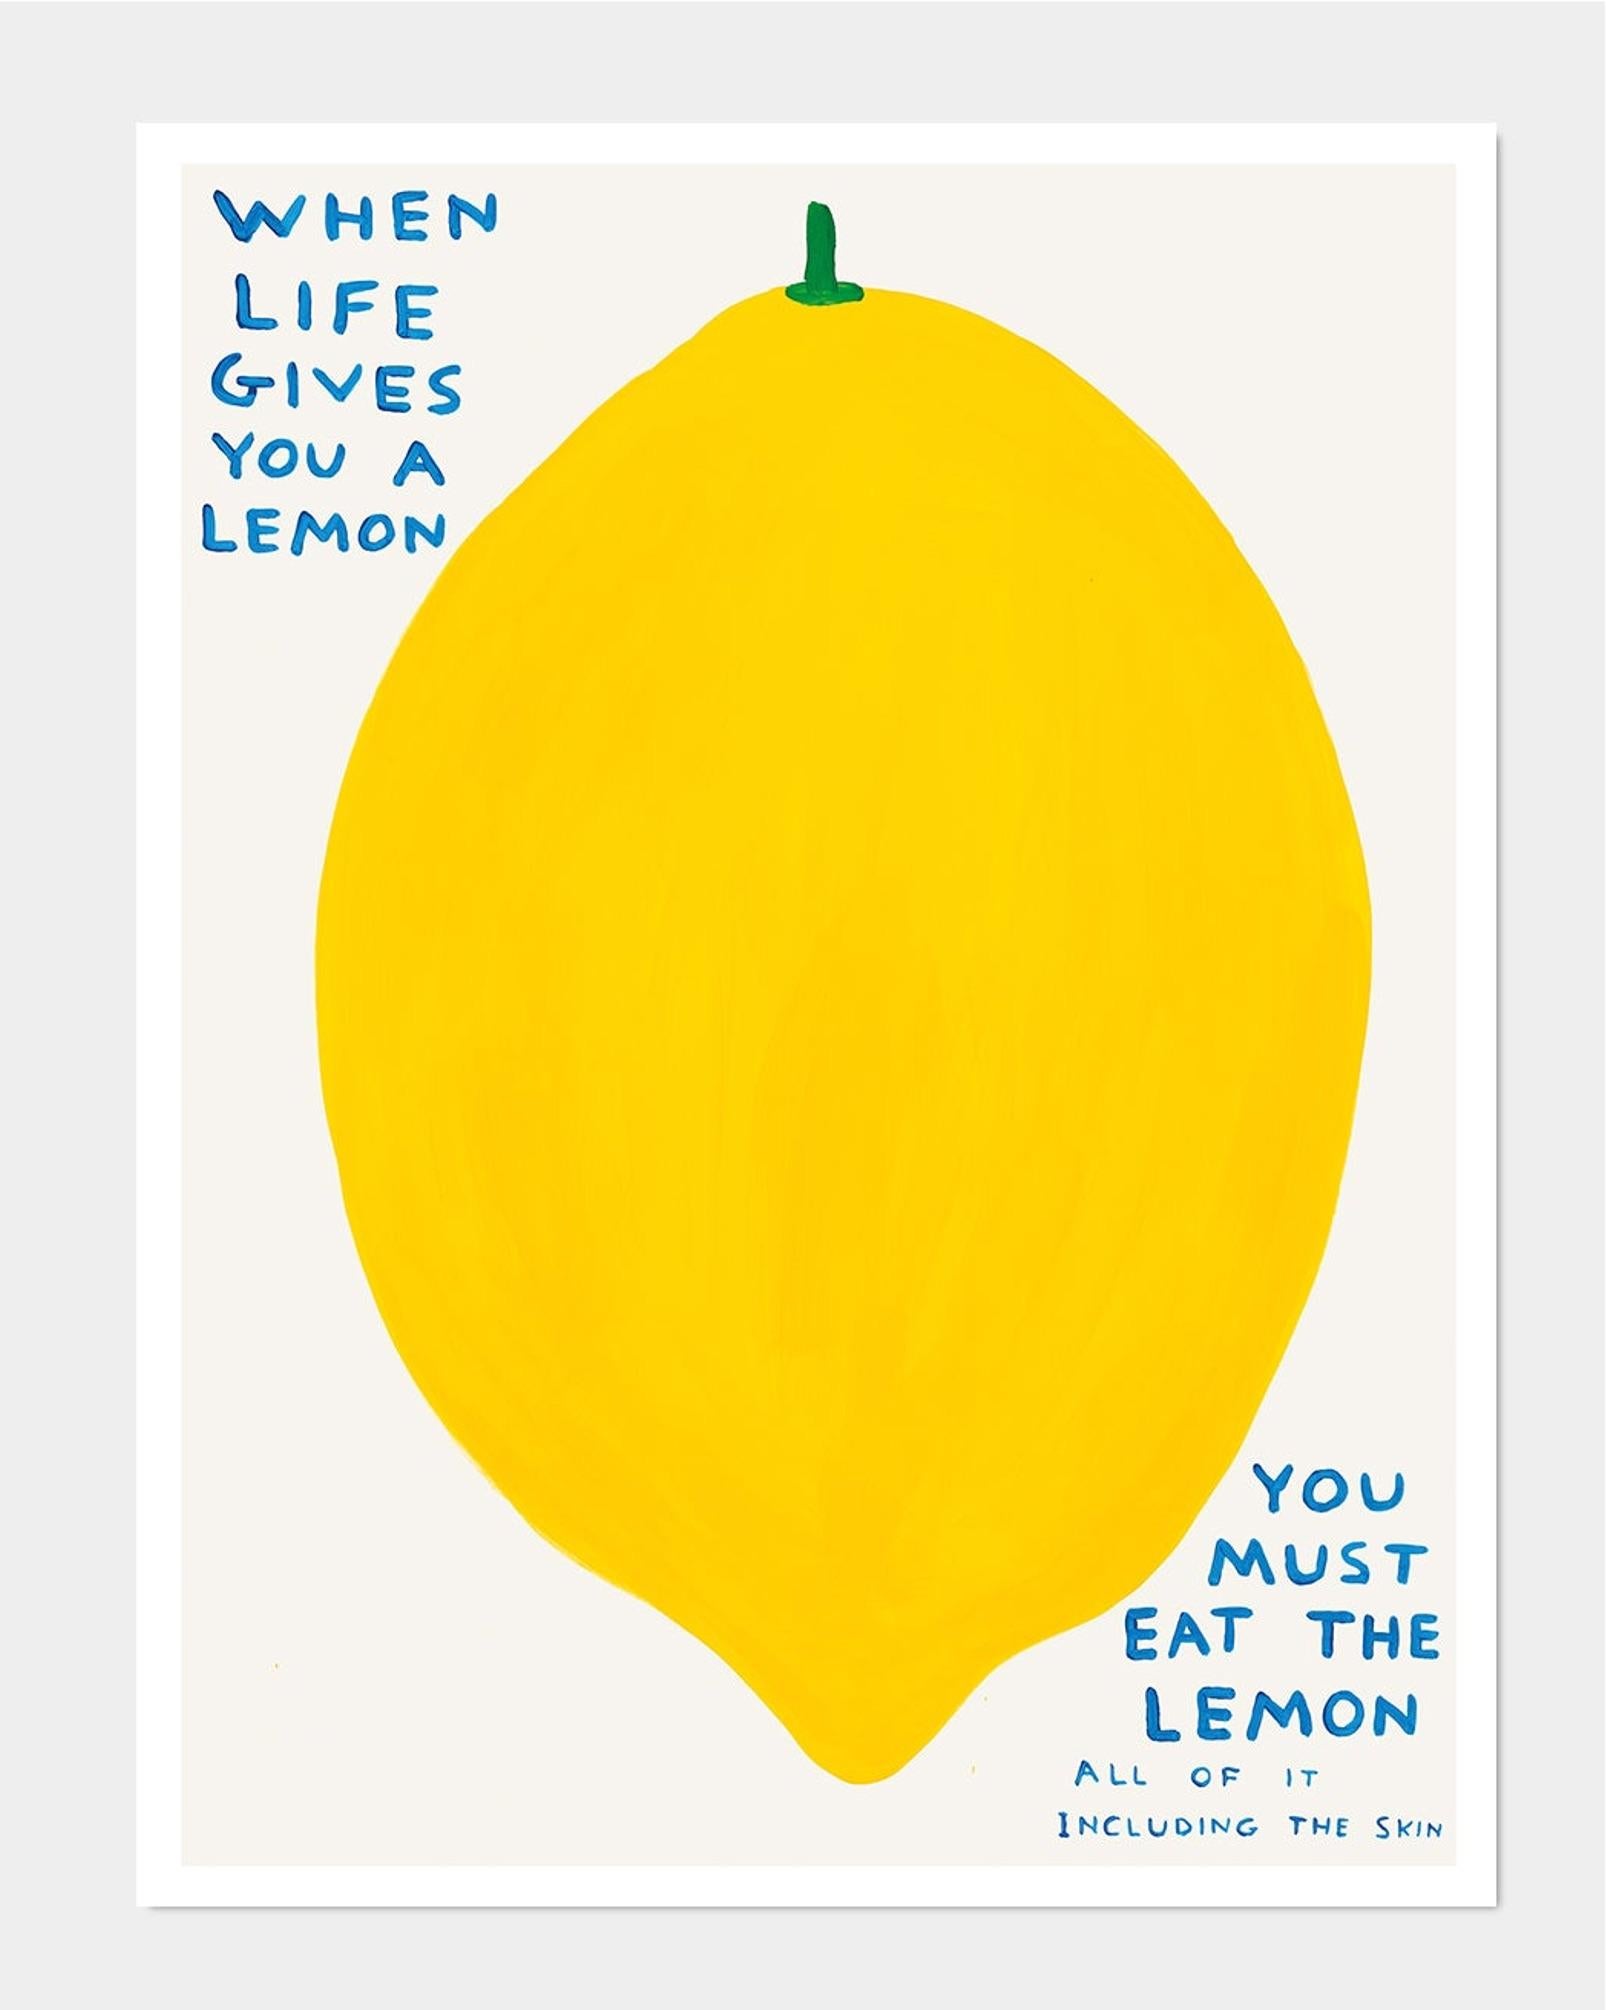 David Shrigley
When Life Gives You A Lemon, 2021
80 x 60 cm
Off-set lithography
Printed on 200g Munken Lynx paper